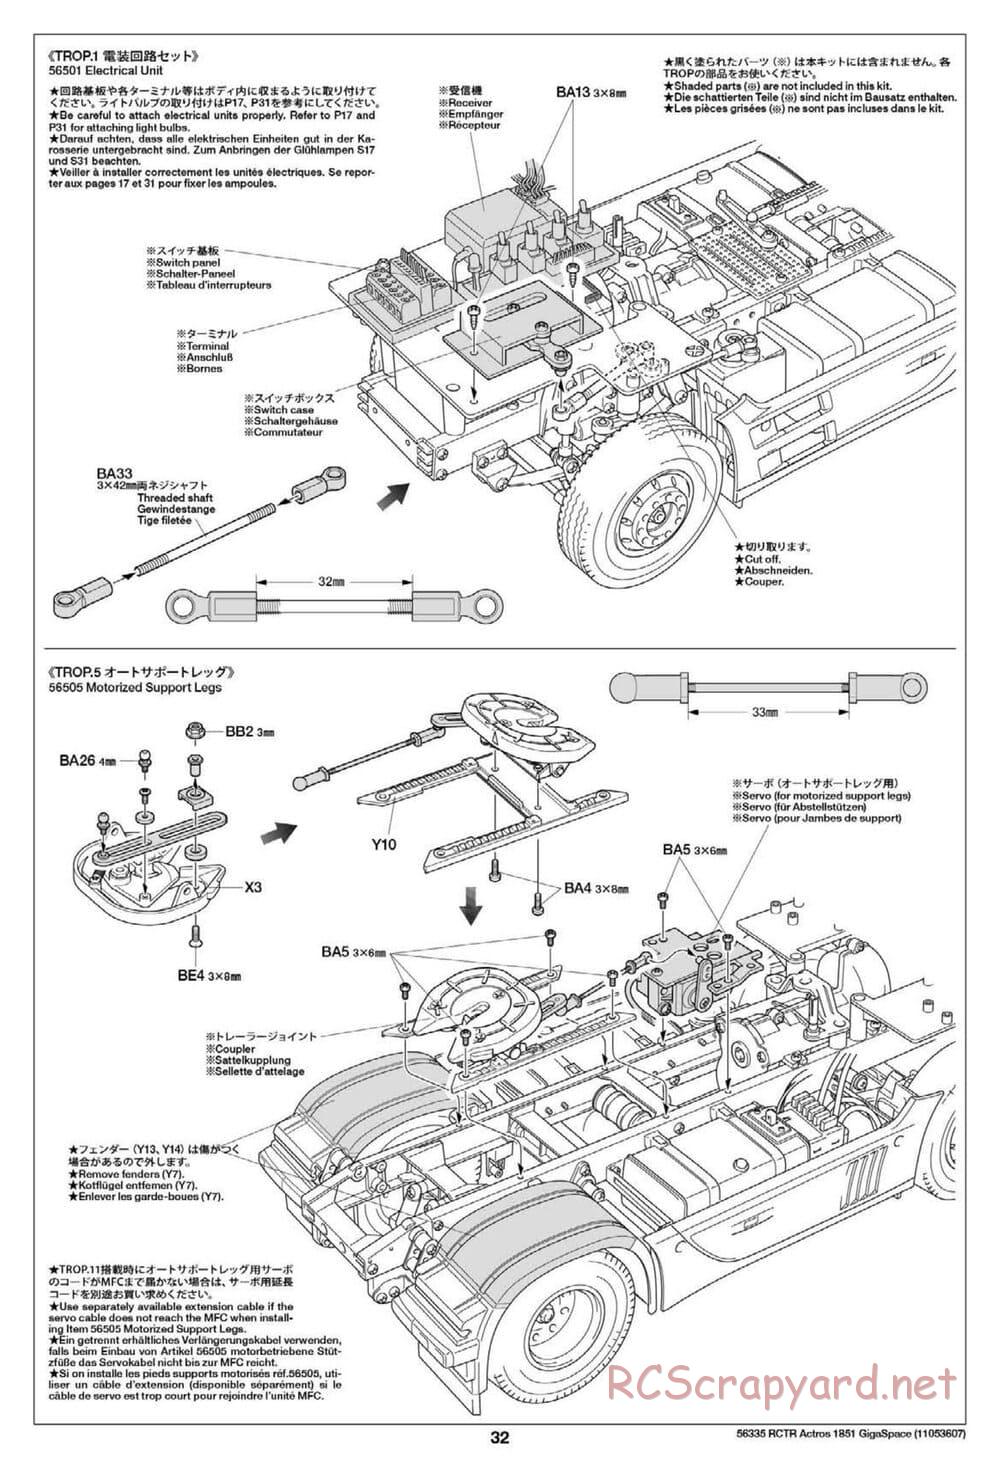 Tamiya - Mercedes-Benz Actros 1851 Gigaspace Tractor Truck Chassis - Manual - Page 32